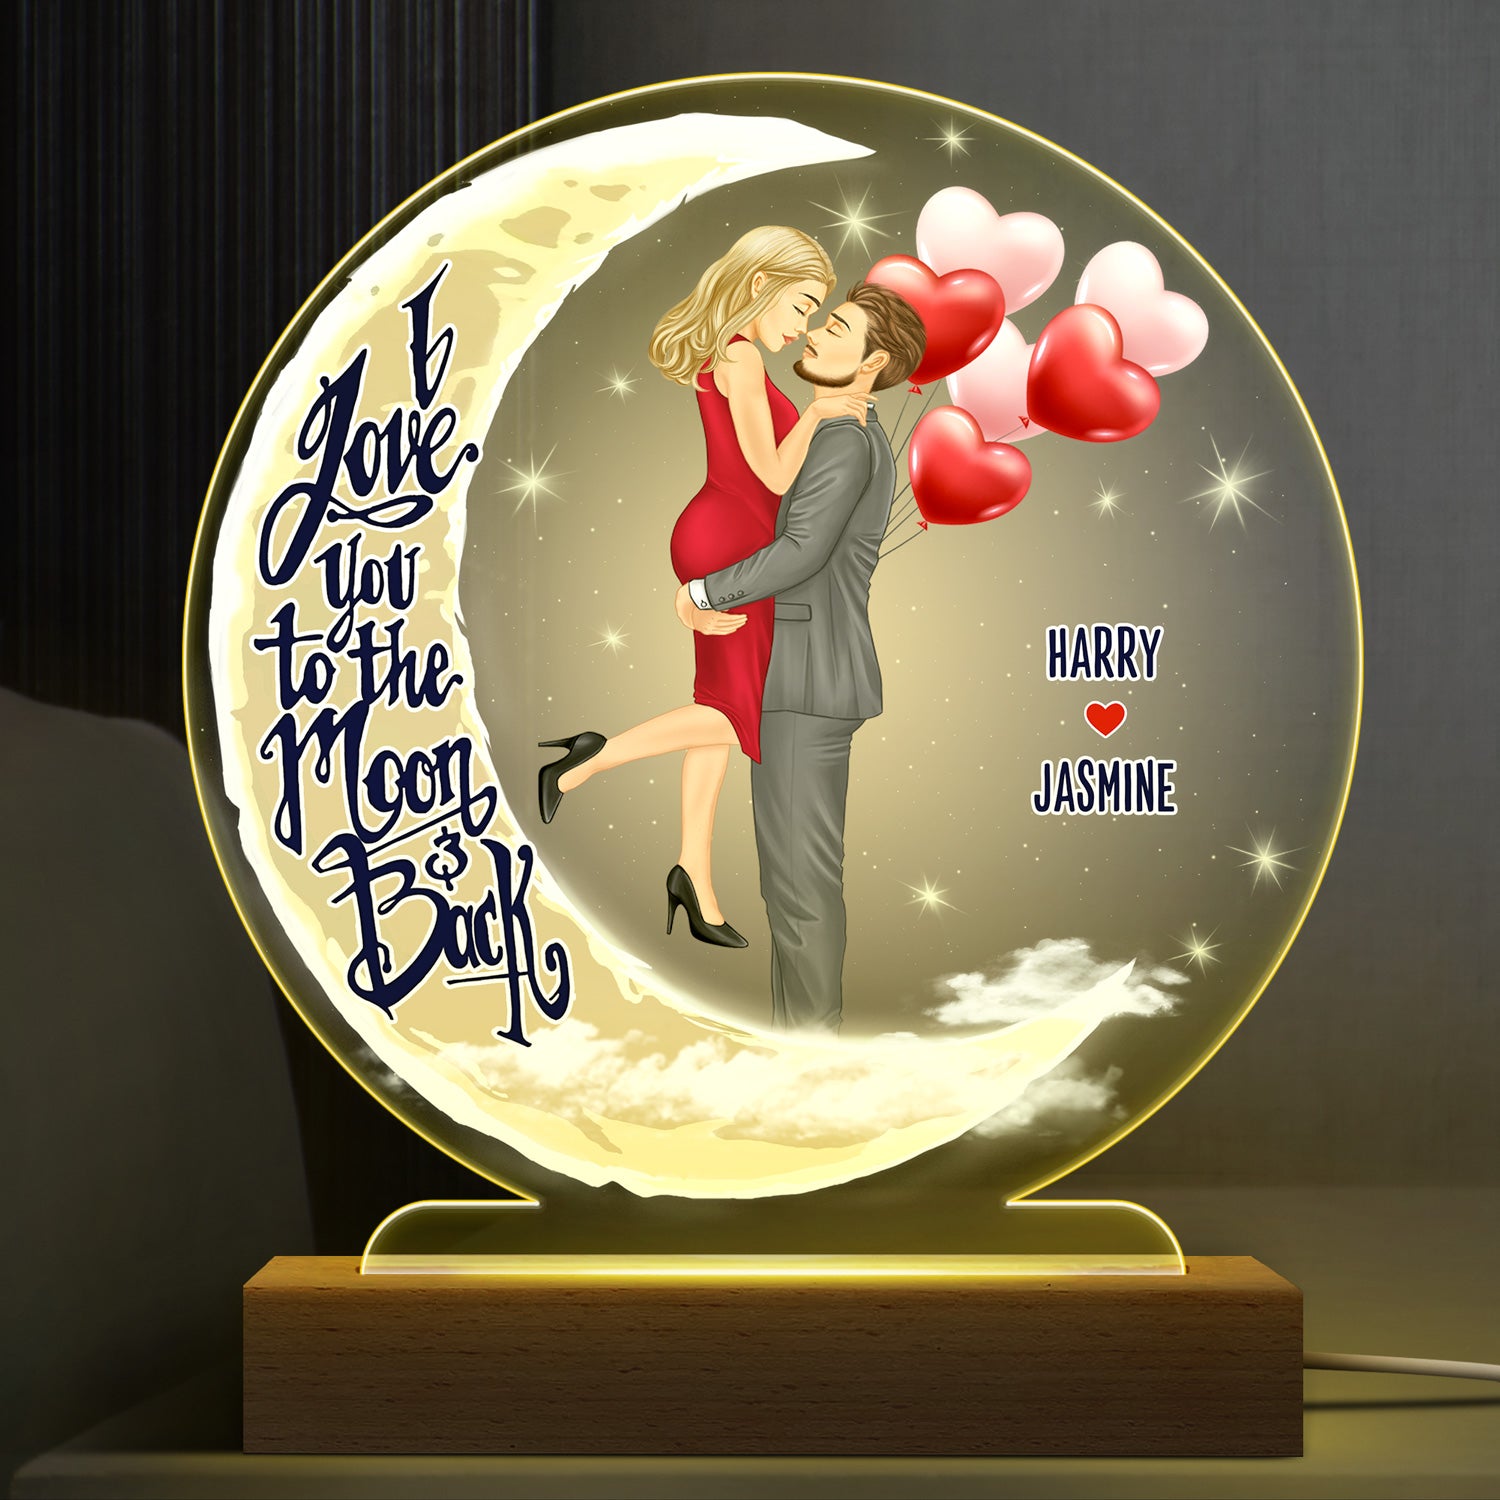 I Love You To The Moon And Back - Anniversary, Birthday Gift For Spouse, Lover, Husband, Wife, Boyfriend, Girlfriend, Married Couple - Personalized Custom 3D Led Light Wooden Base